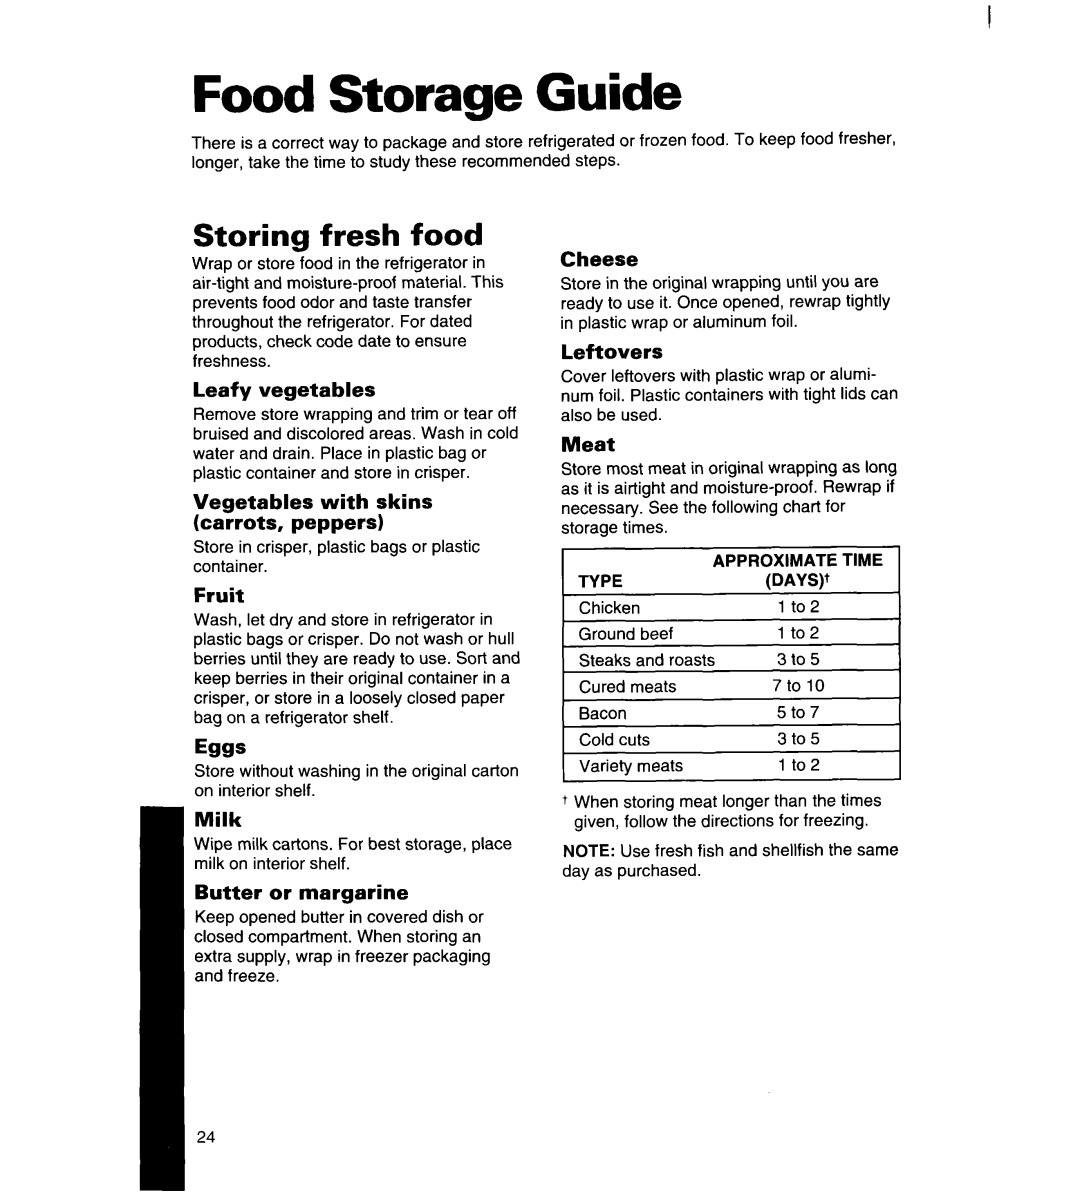 Whirlpool 8ED22DQ Food Storage Guide, Storing fresh food, Leafy vegetables, Vegetables with skins carrots, peppers, Fruit 